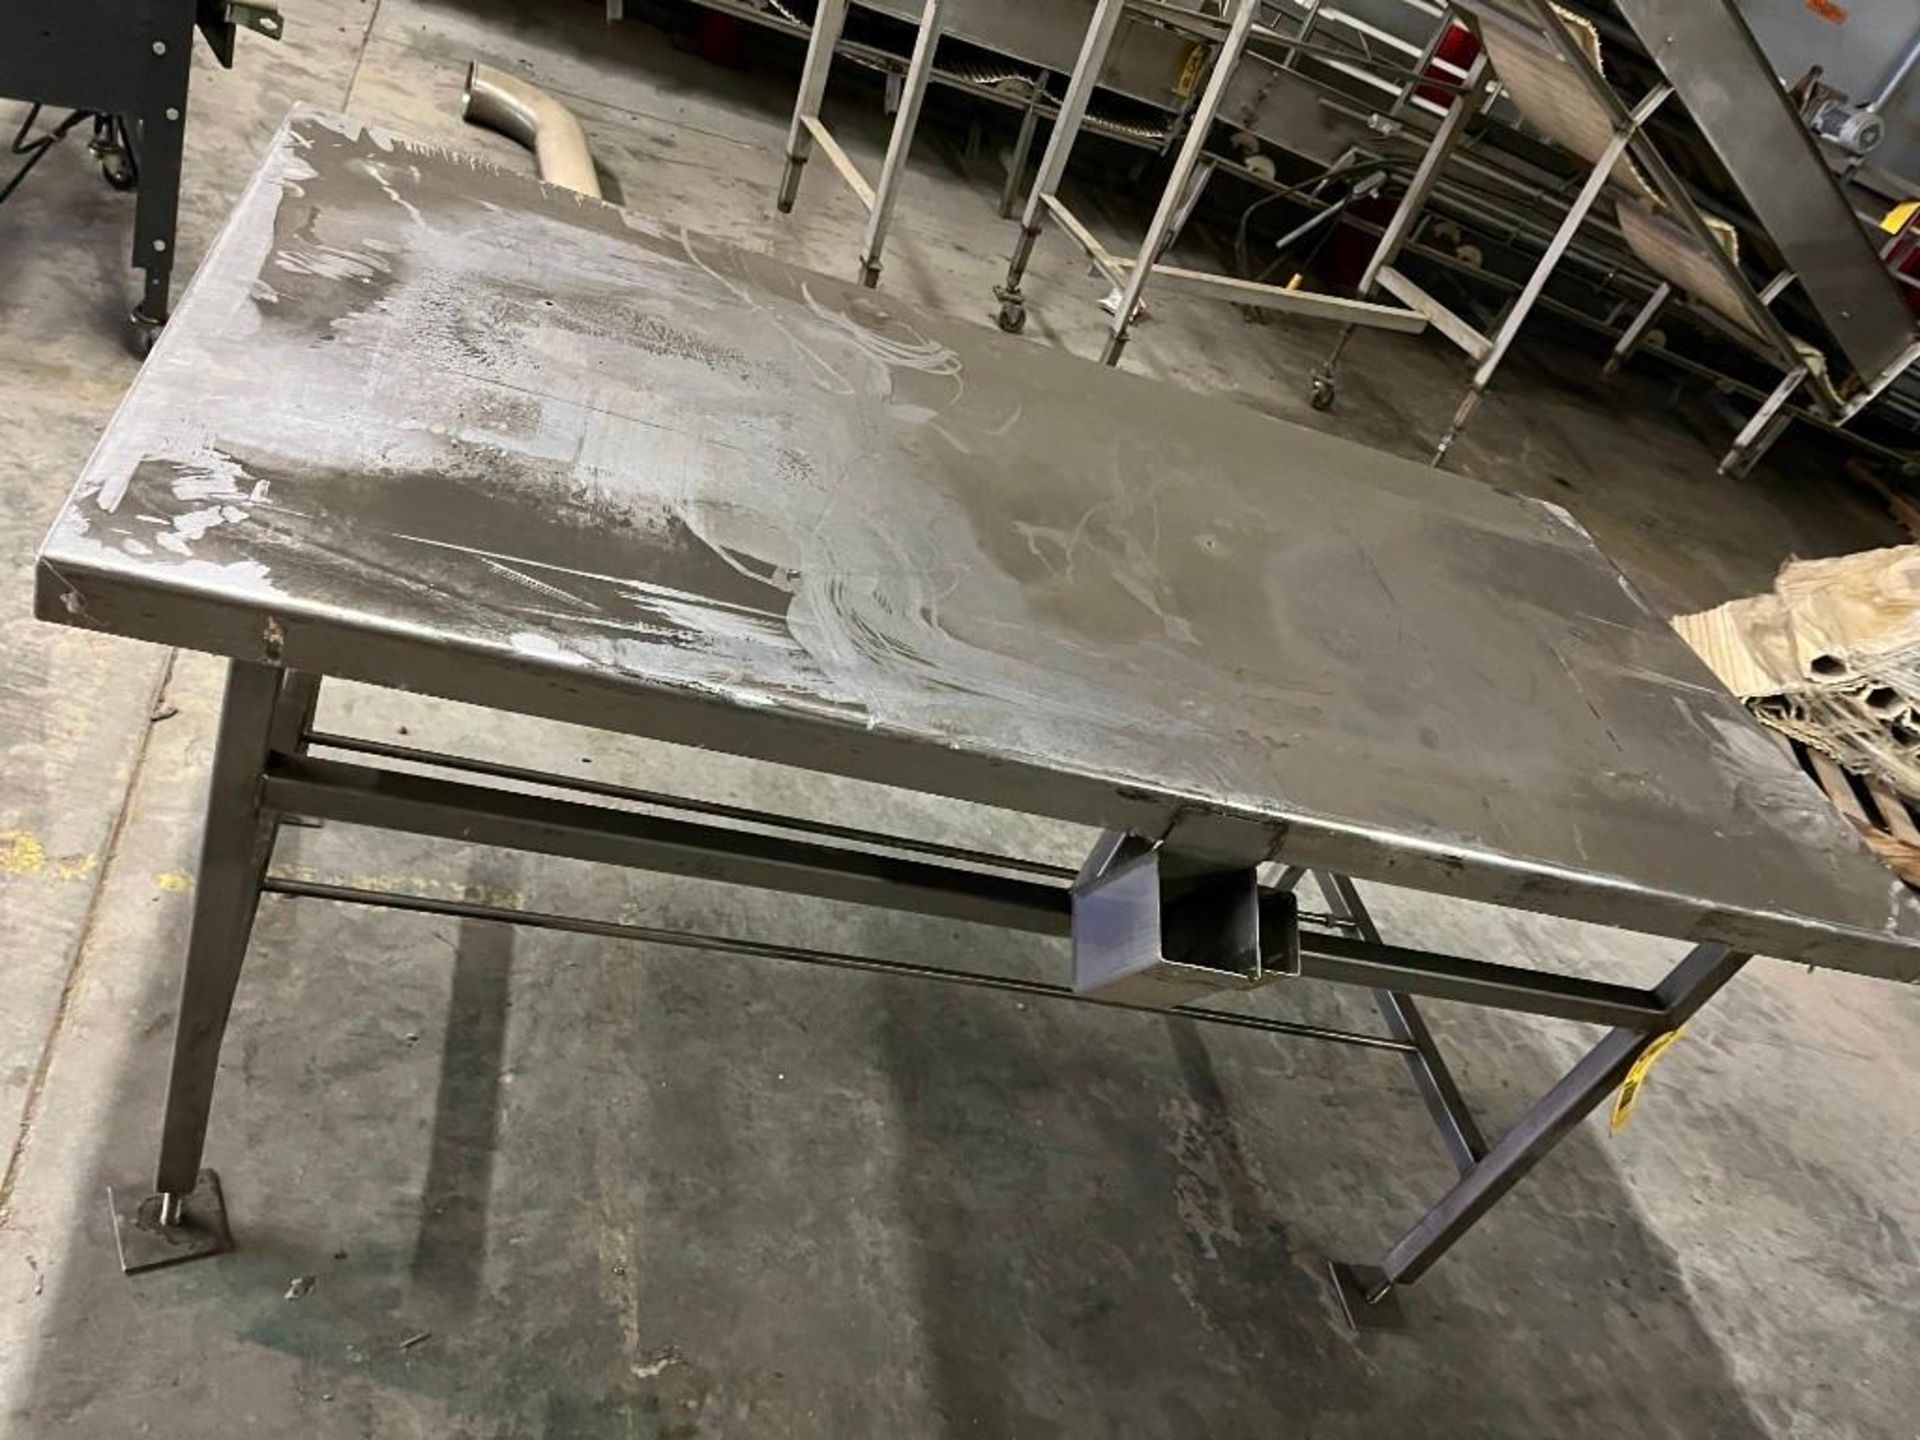 SS 36"W x 72"L Industrial Table - Image 4 of 4